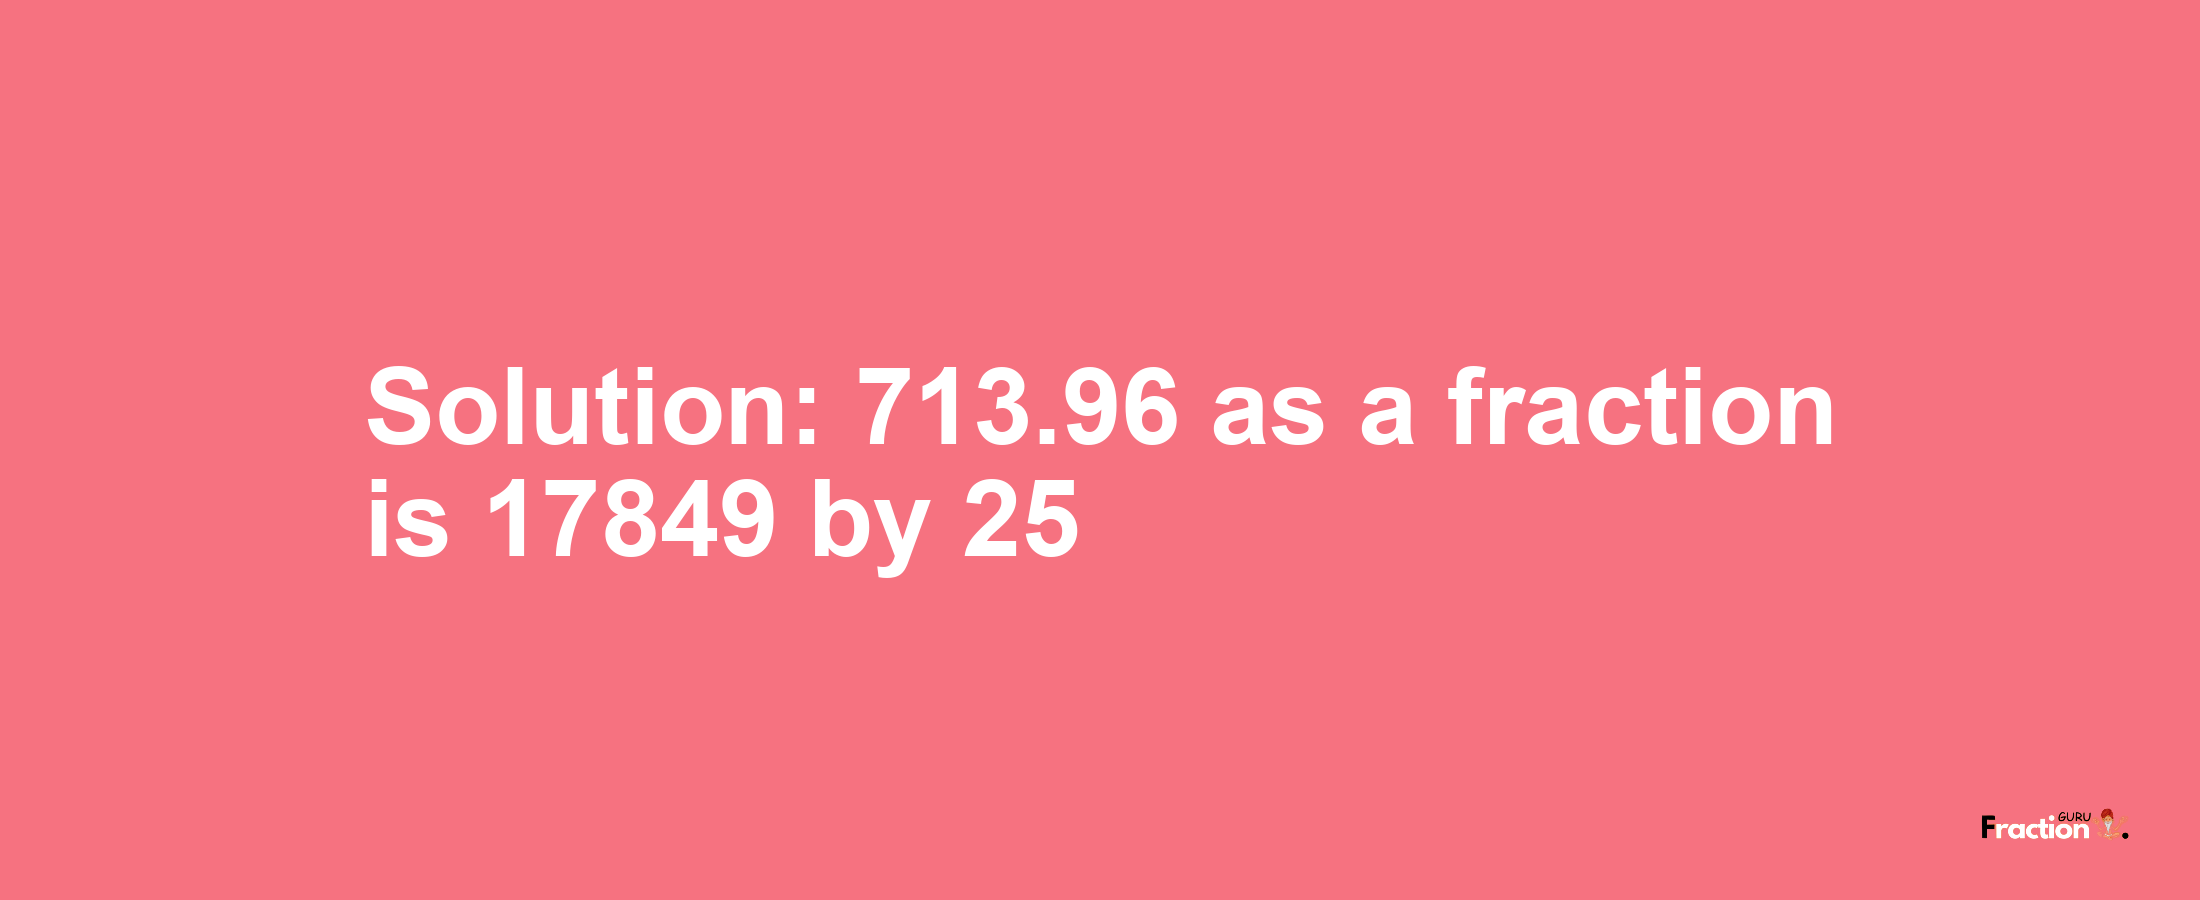 Solution:713.96 as a fraction is 17849/25